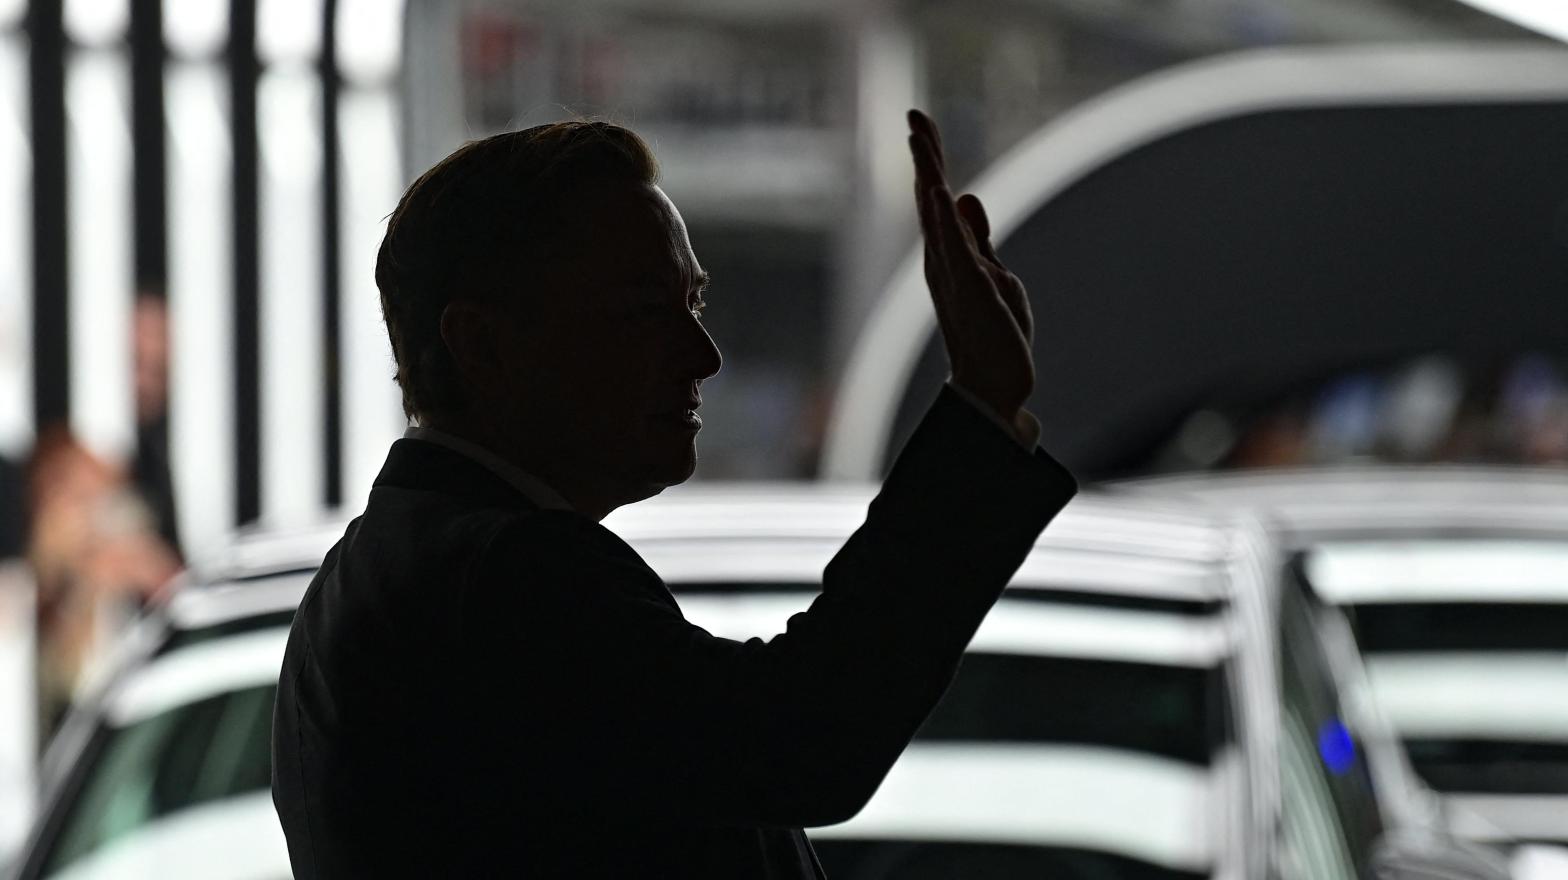 Tesla CEO Elon Musk is having second thoughts about buying Twitter. (Photo: Patrick Pleul/Pool/AFP, Getty Images)